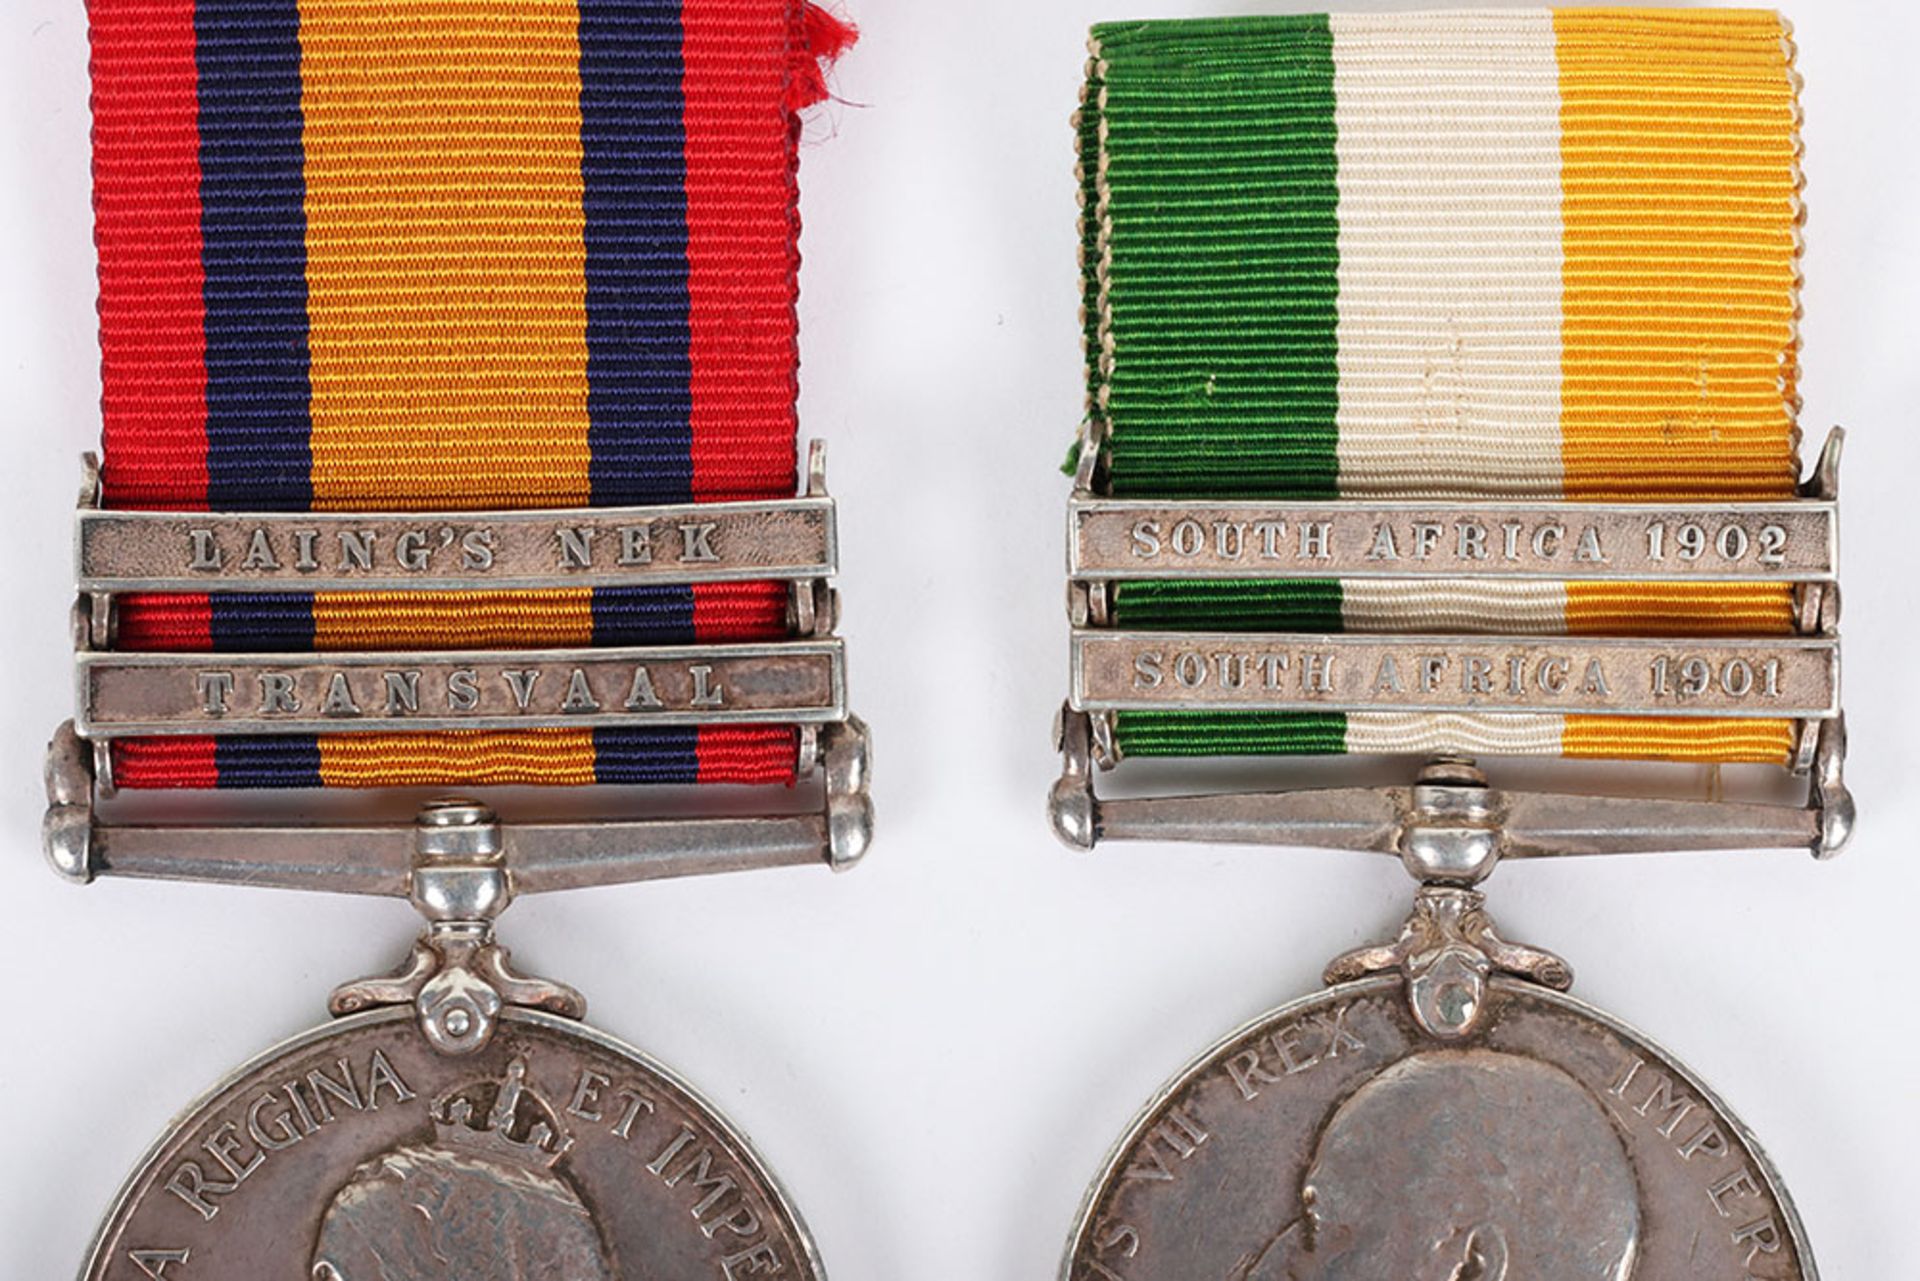 Full Entitlement Medal Group of Three for Service in Both the Boer War and Great War, Rifle Brigade - Image 2 of 4